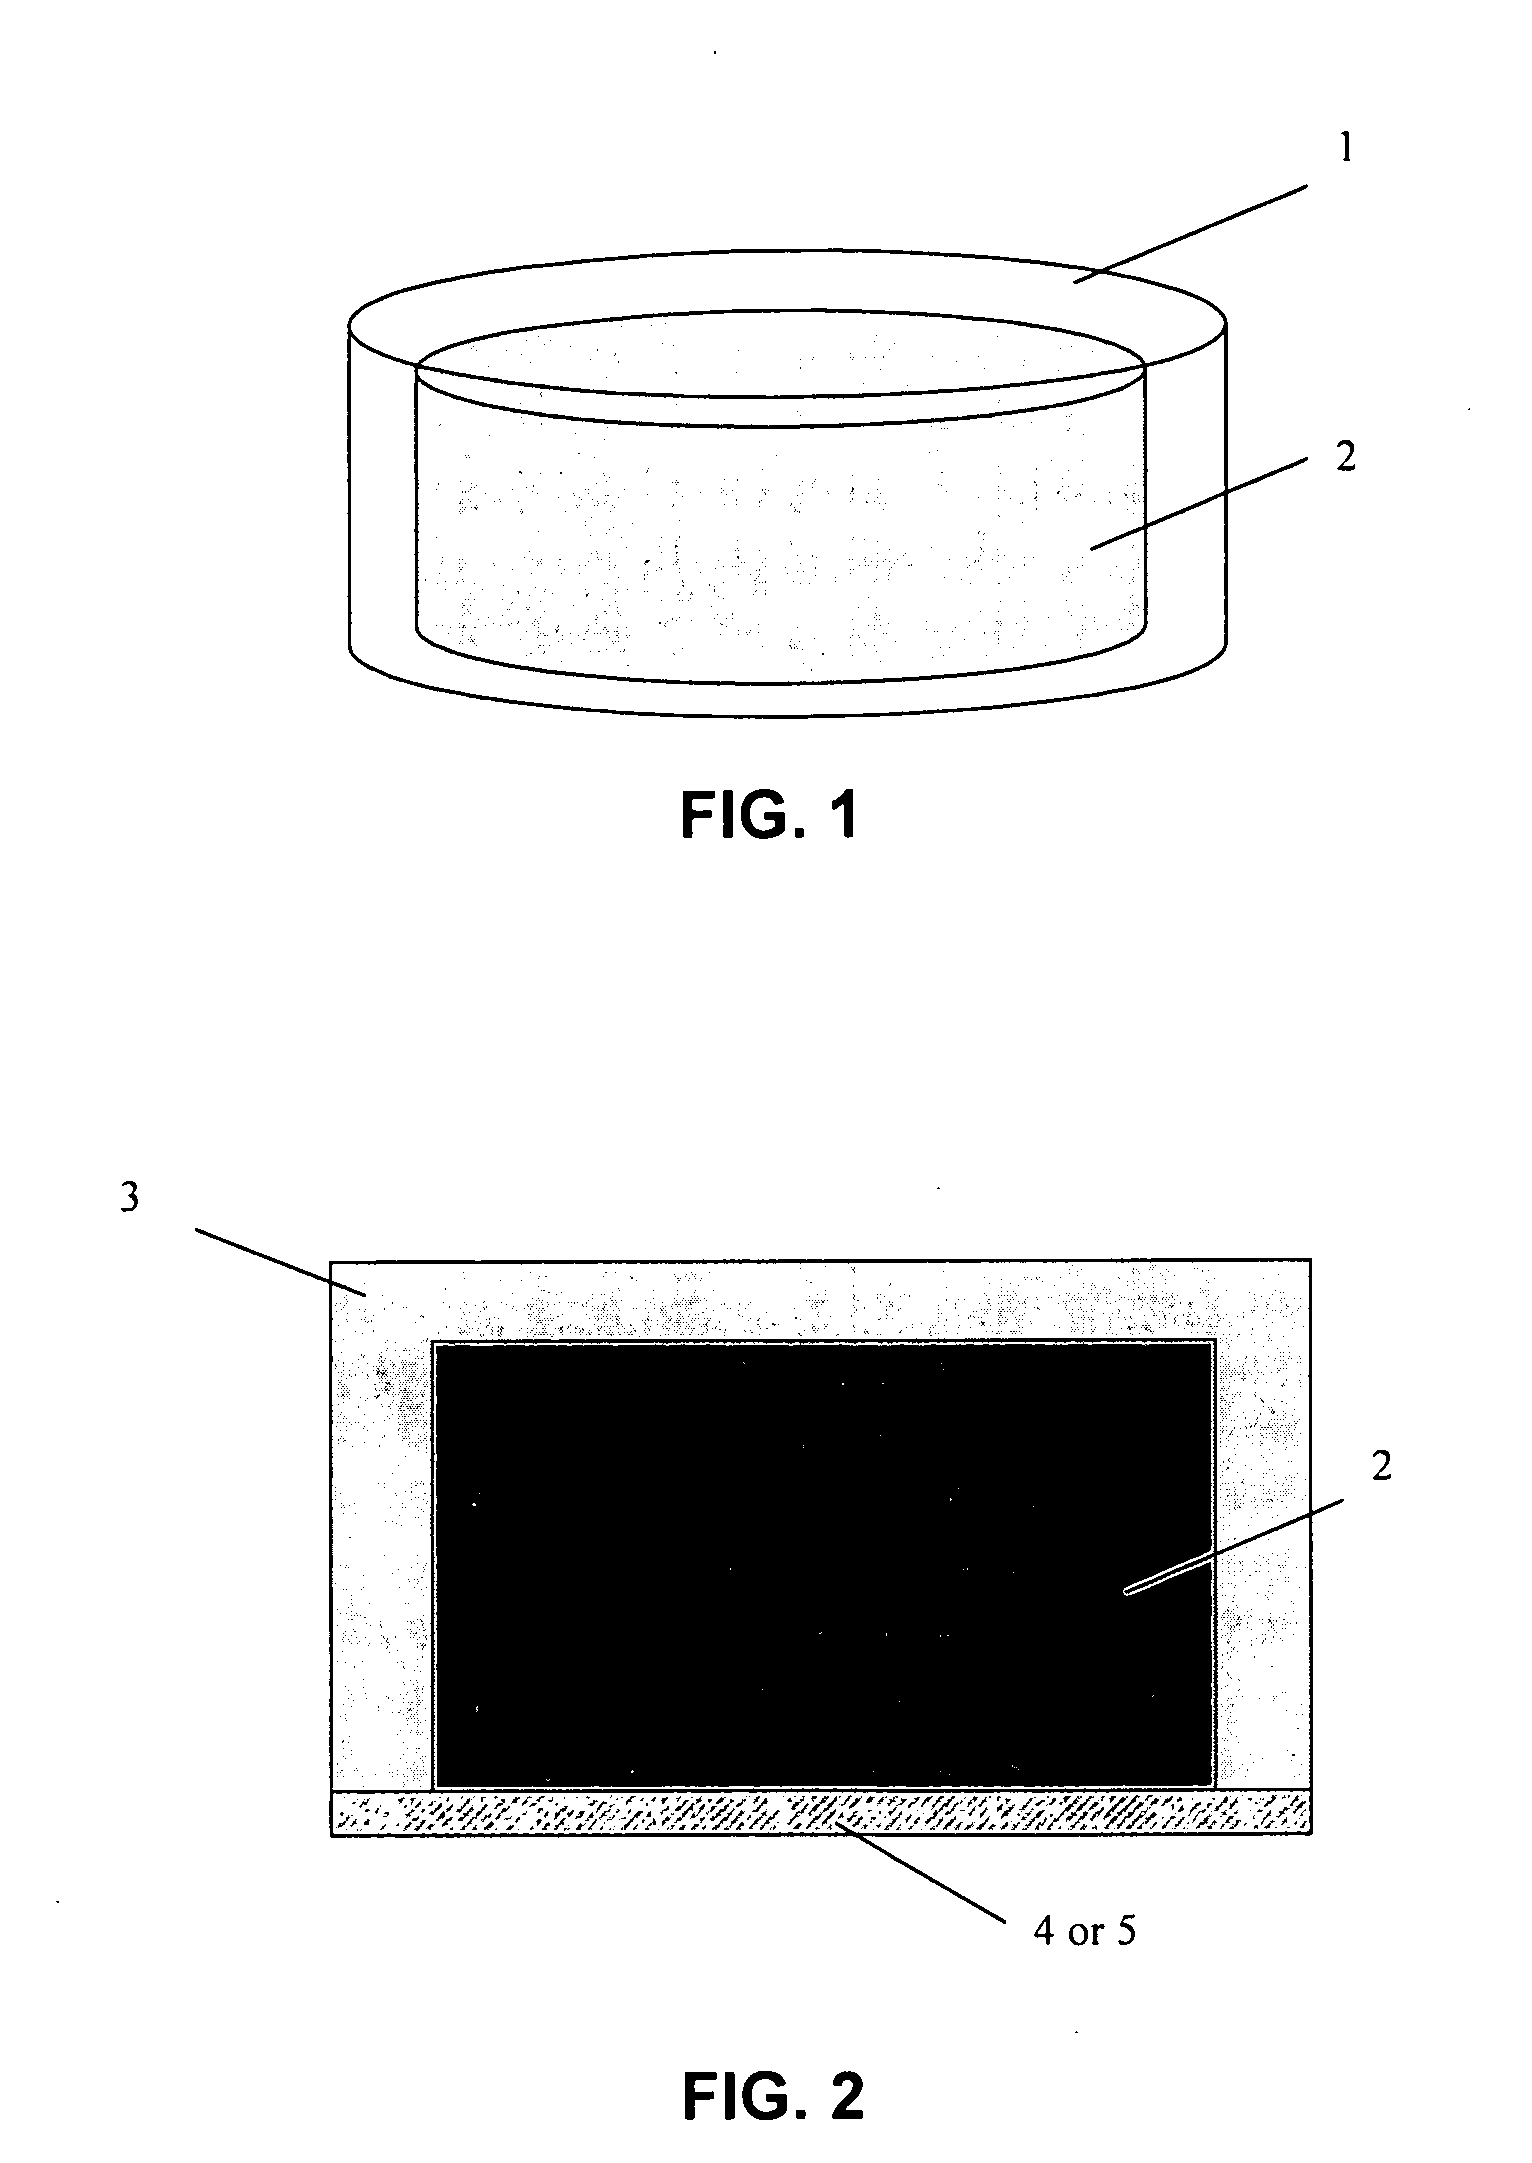 Drug delivery devices for delivery of therapeutic agents